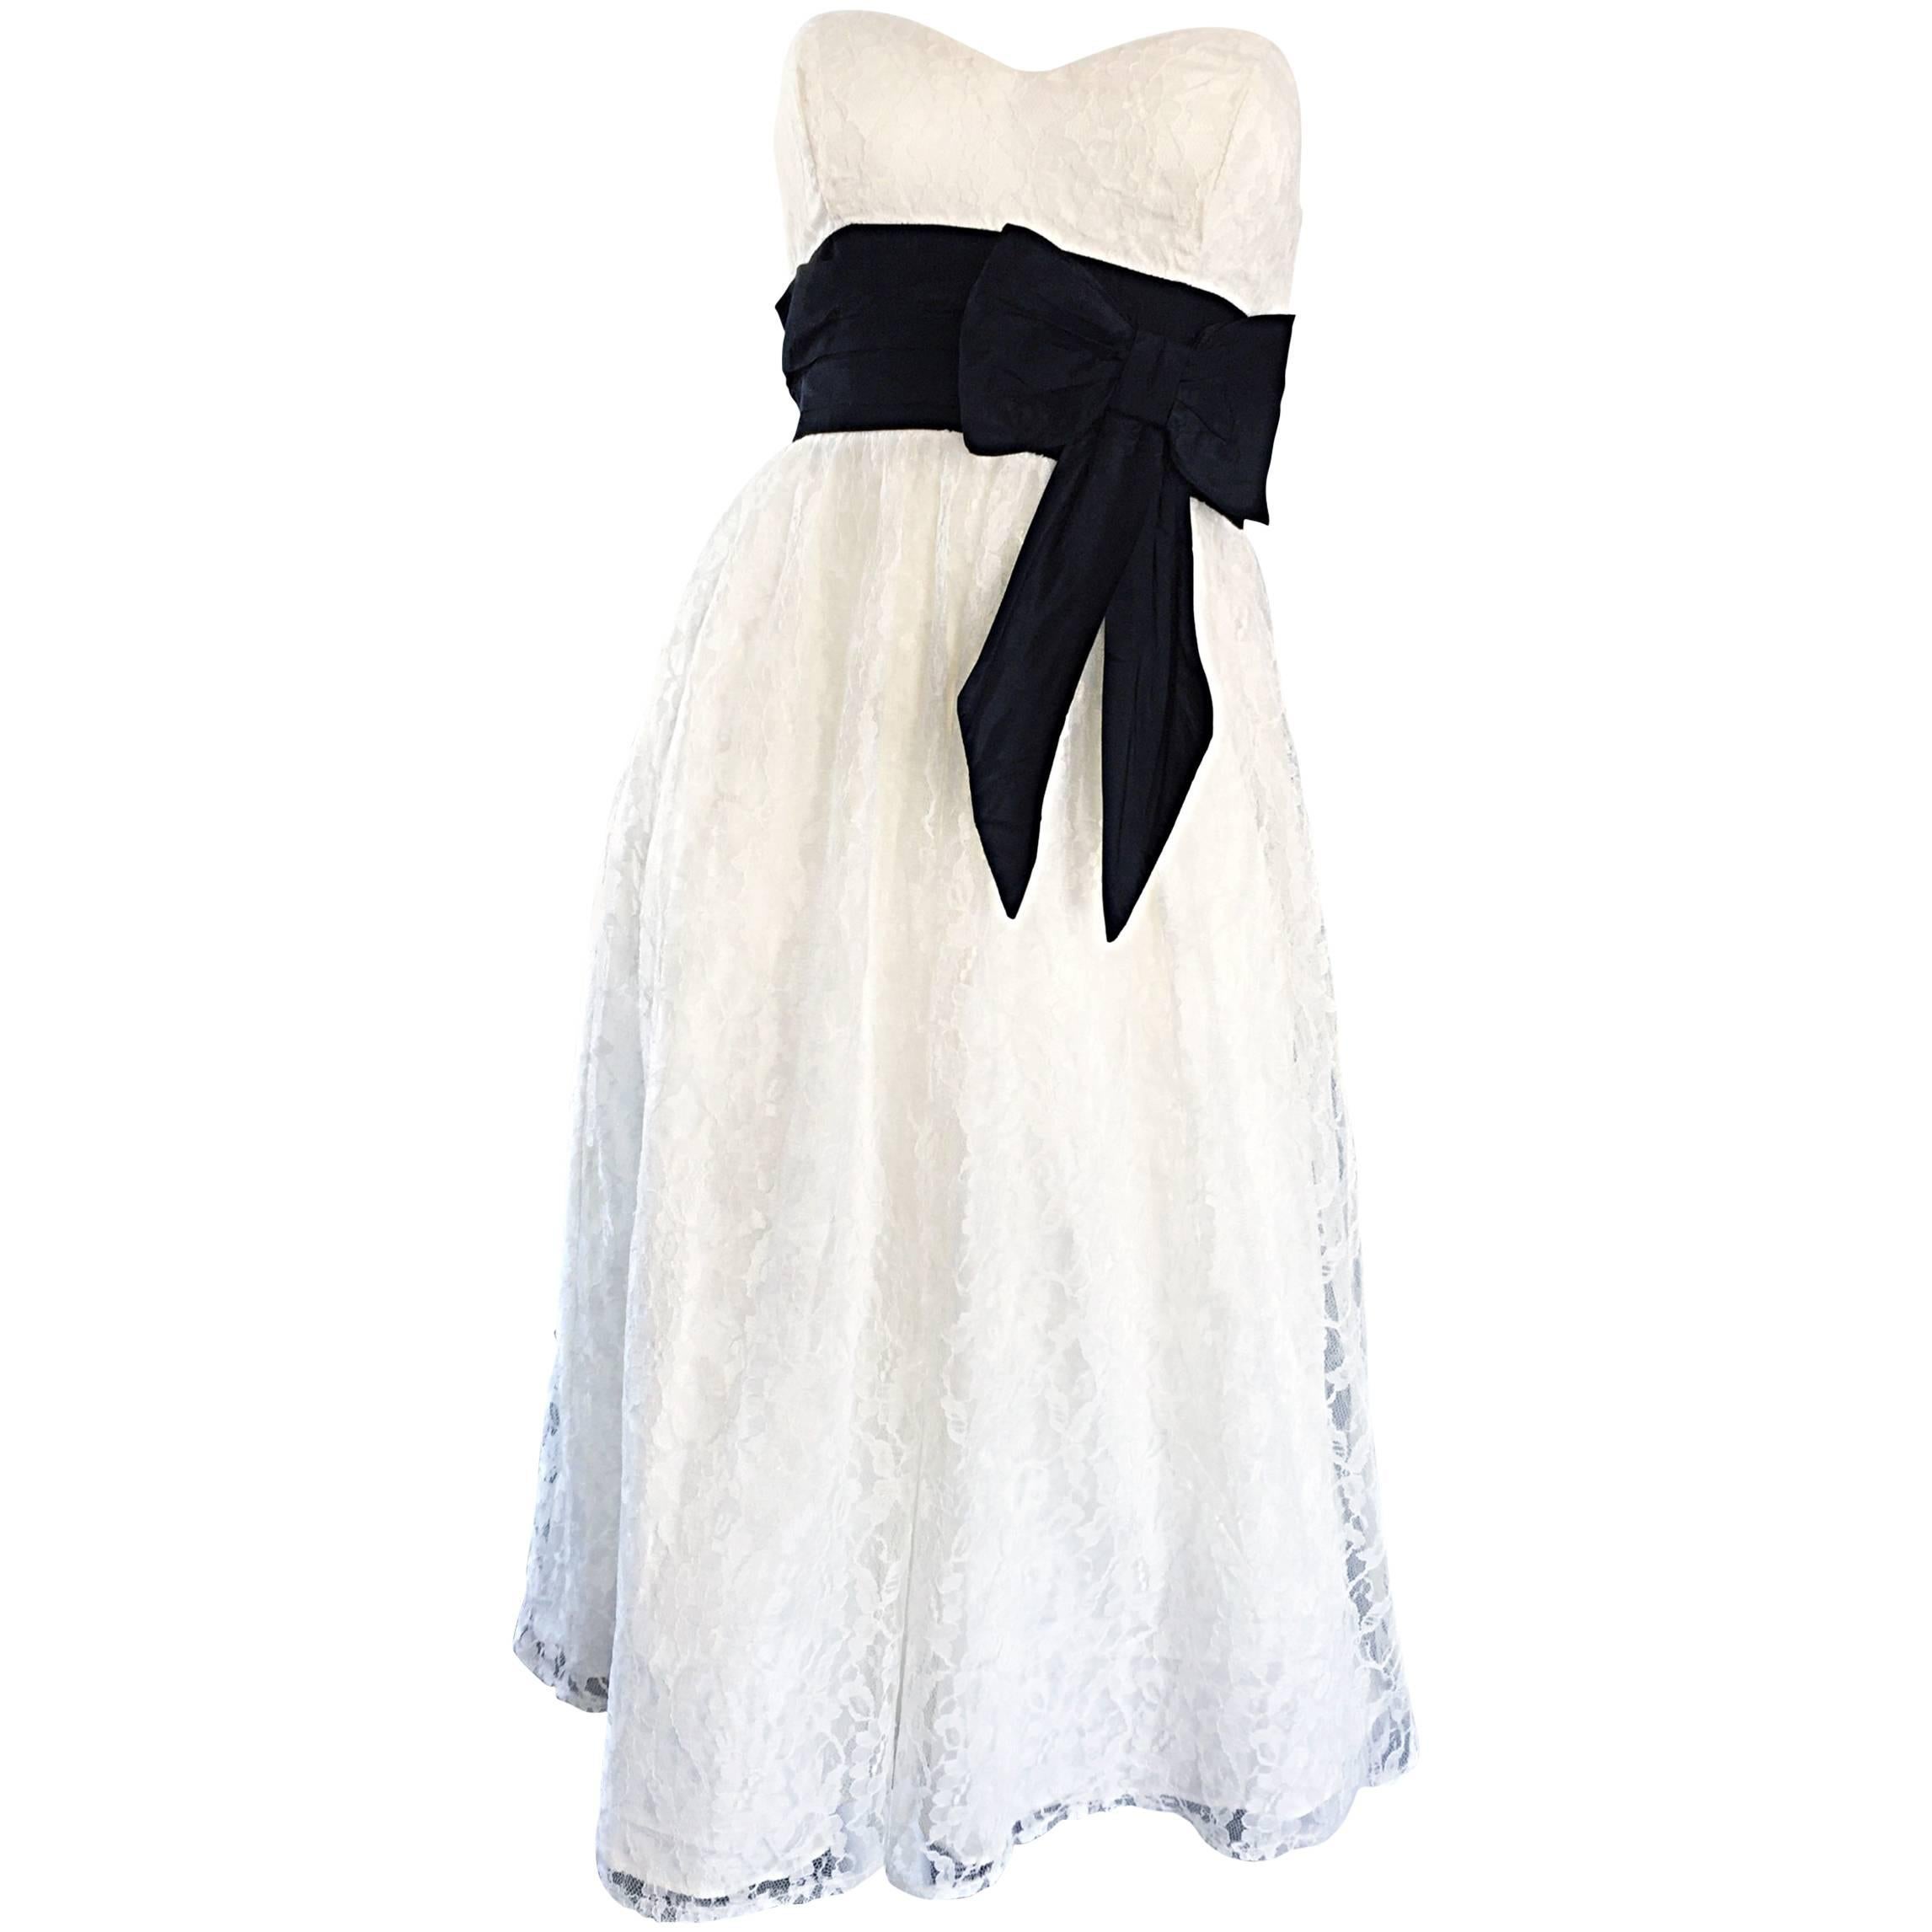 Chic 1990s does 1950s White and Black Lace Strapless Vintage 90s Dress Small